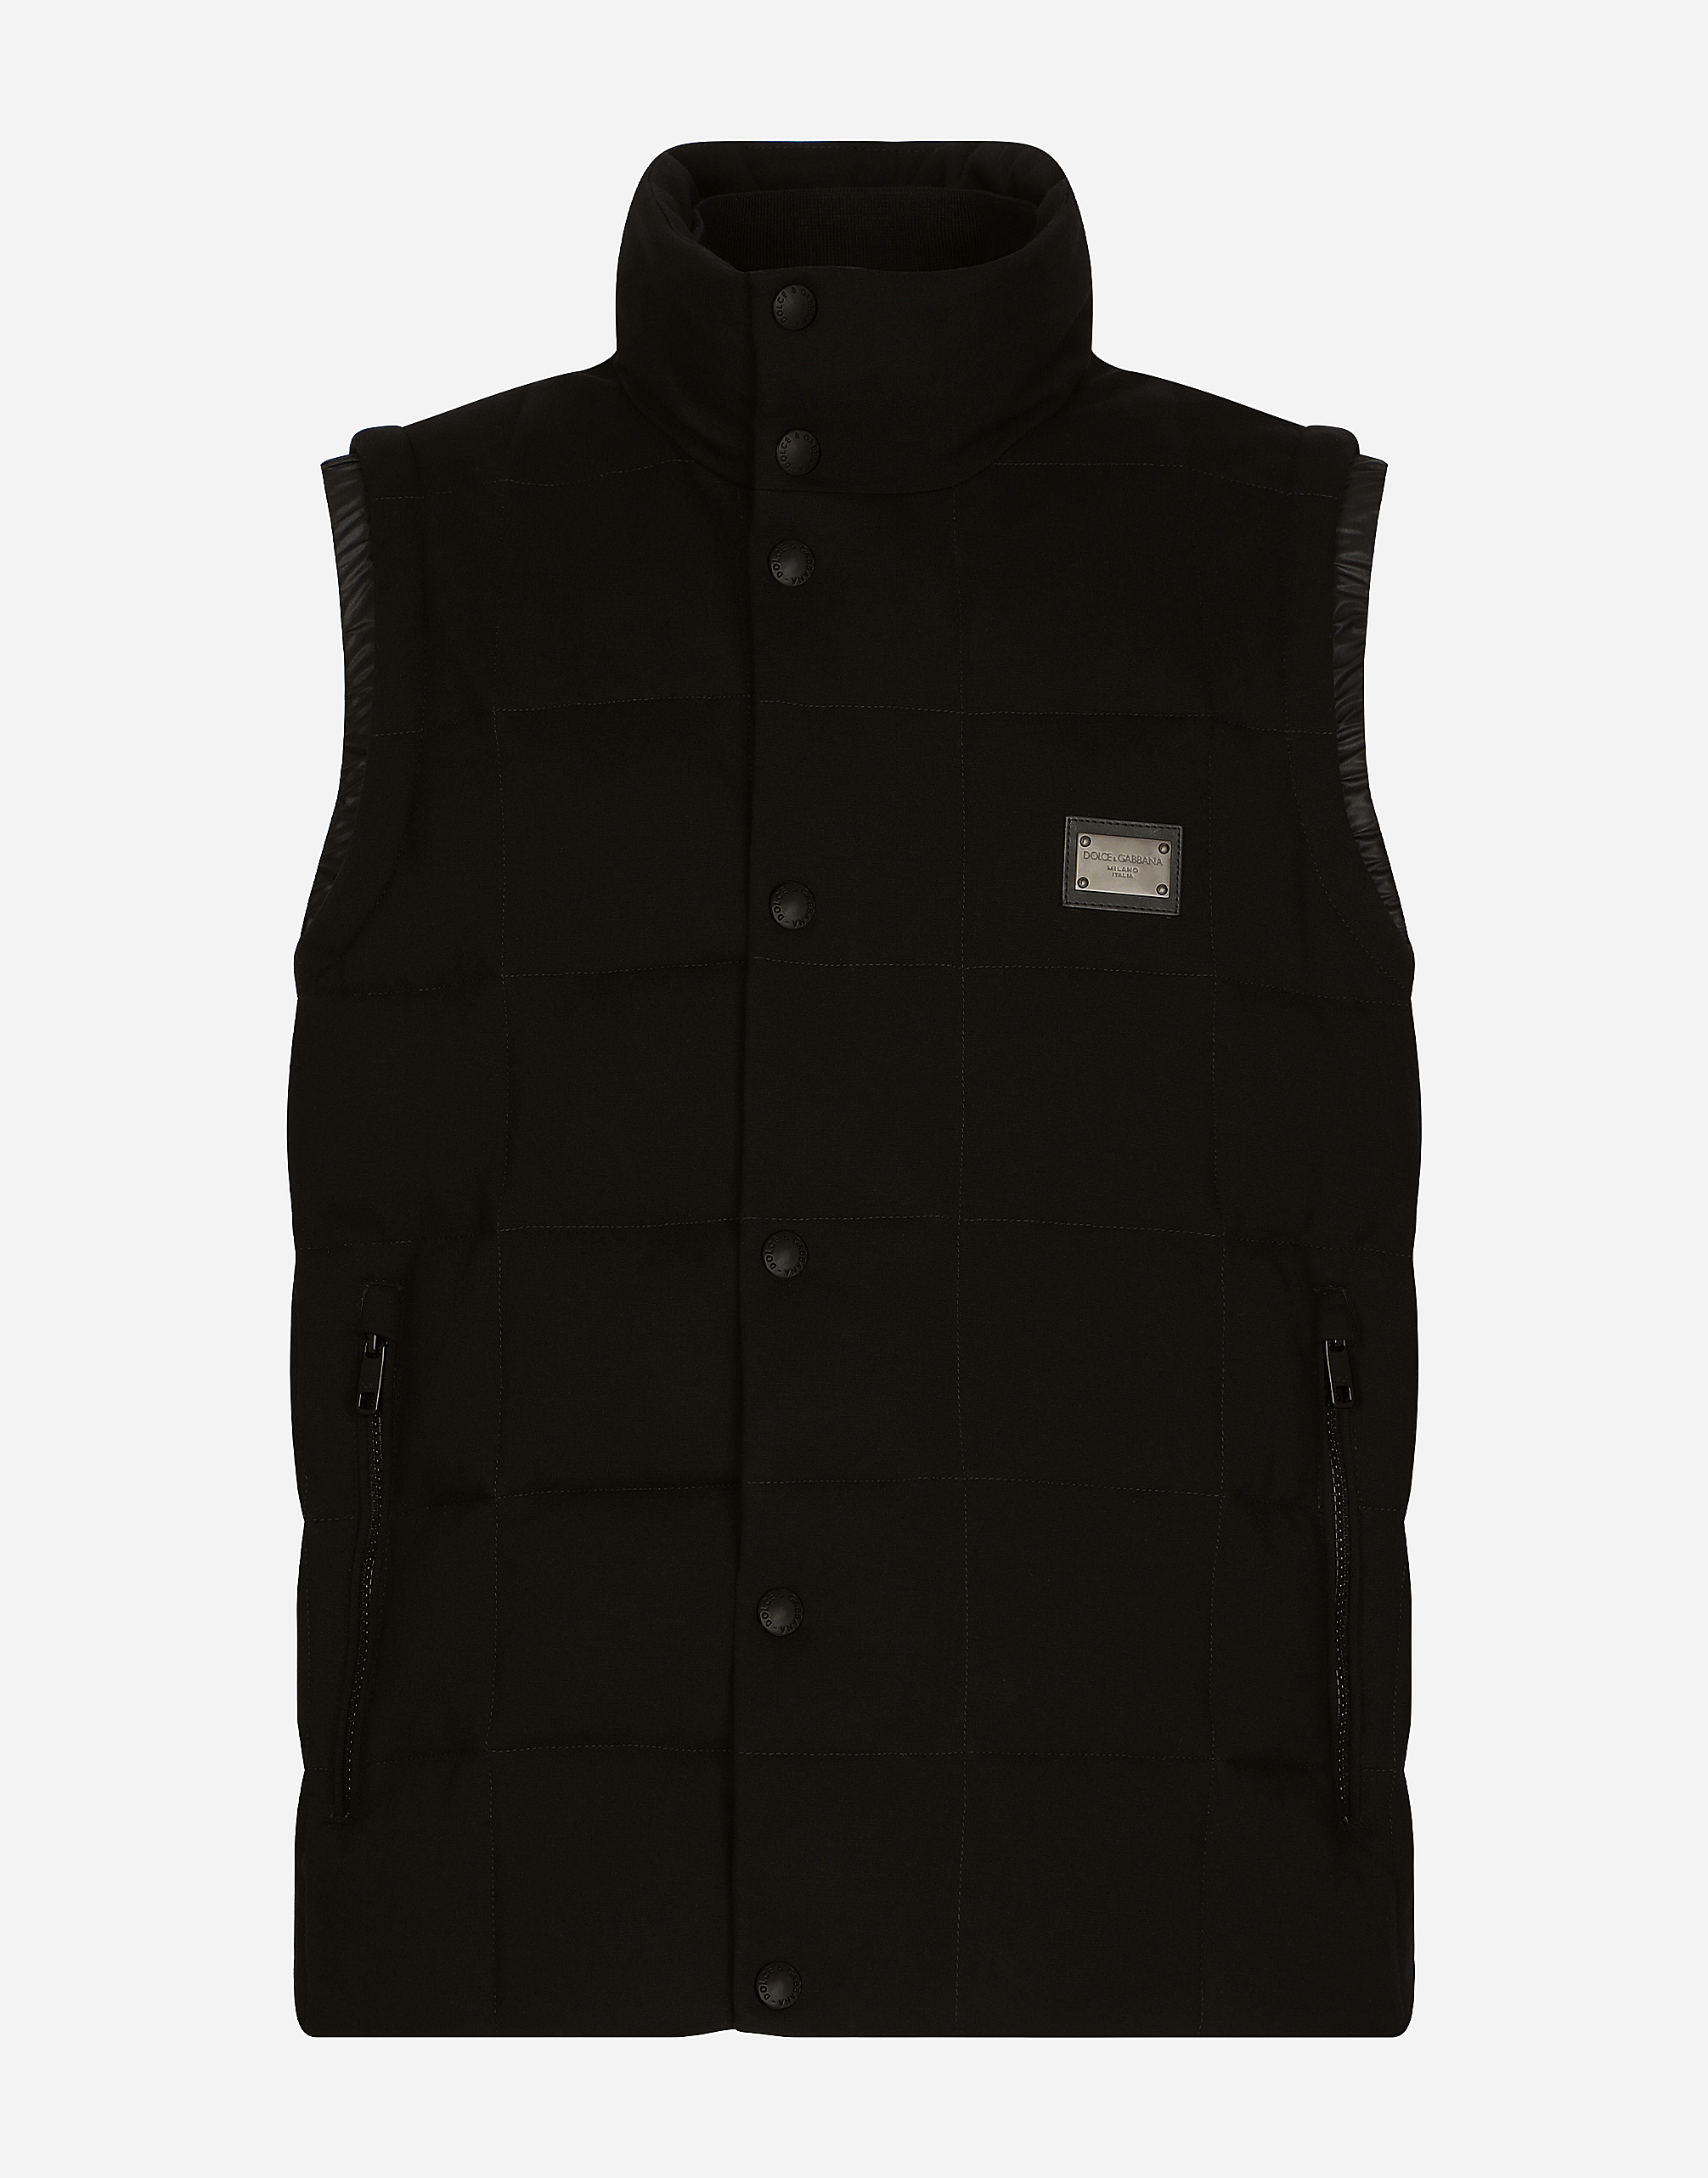 Jersey vest with branded tag in Black